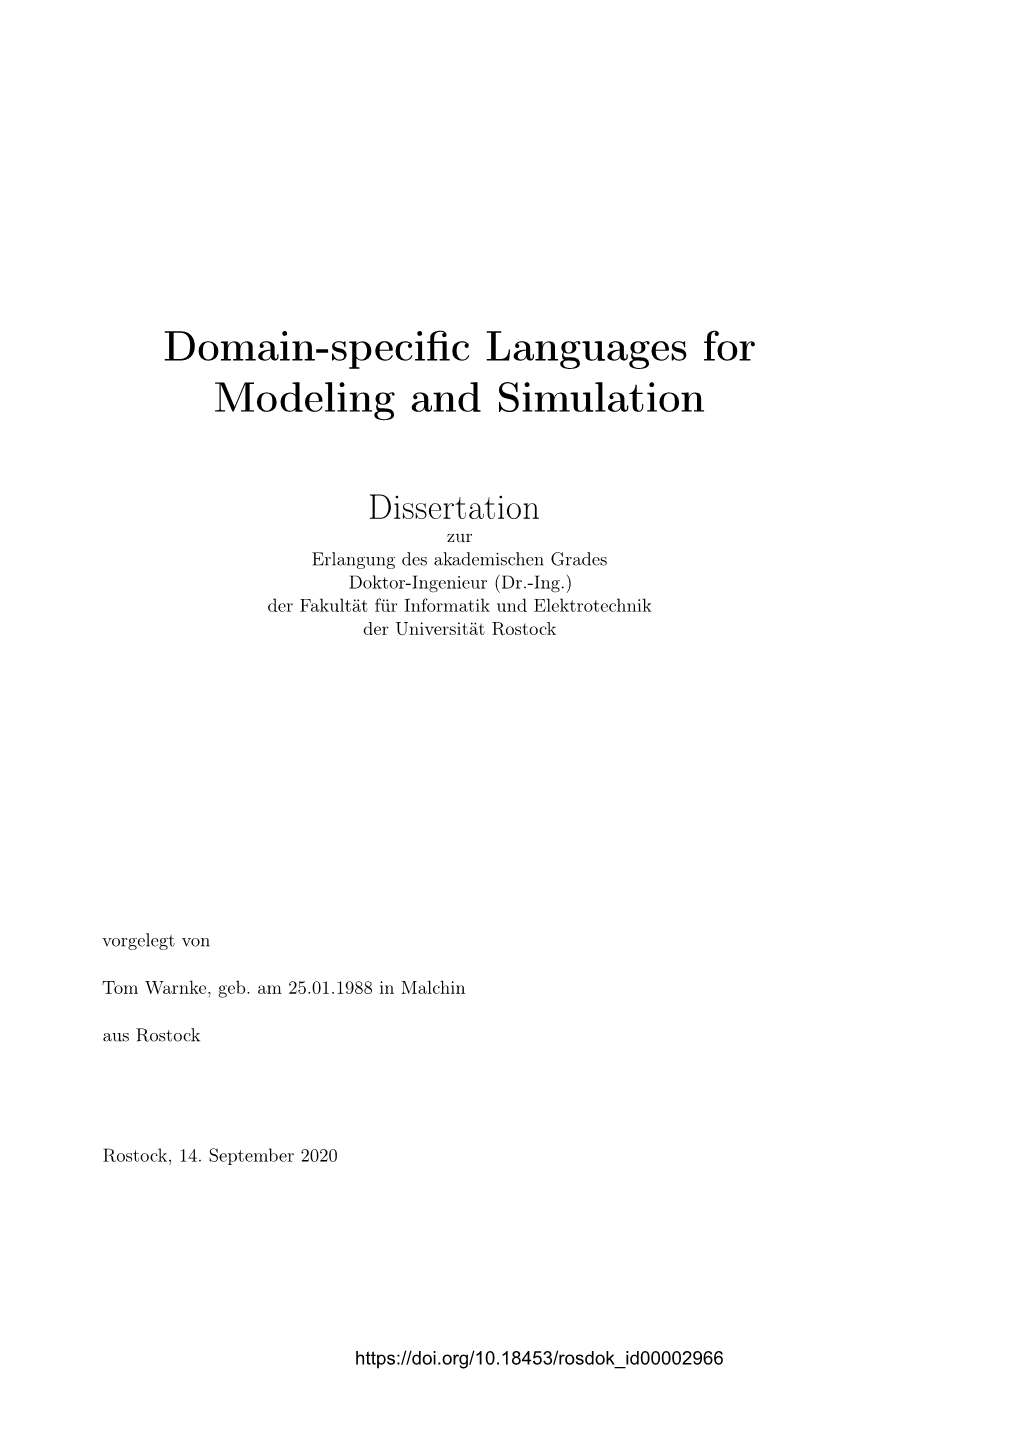 Domain-Specific Languages for Modeling and Simulation